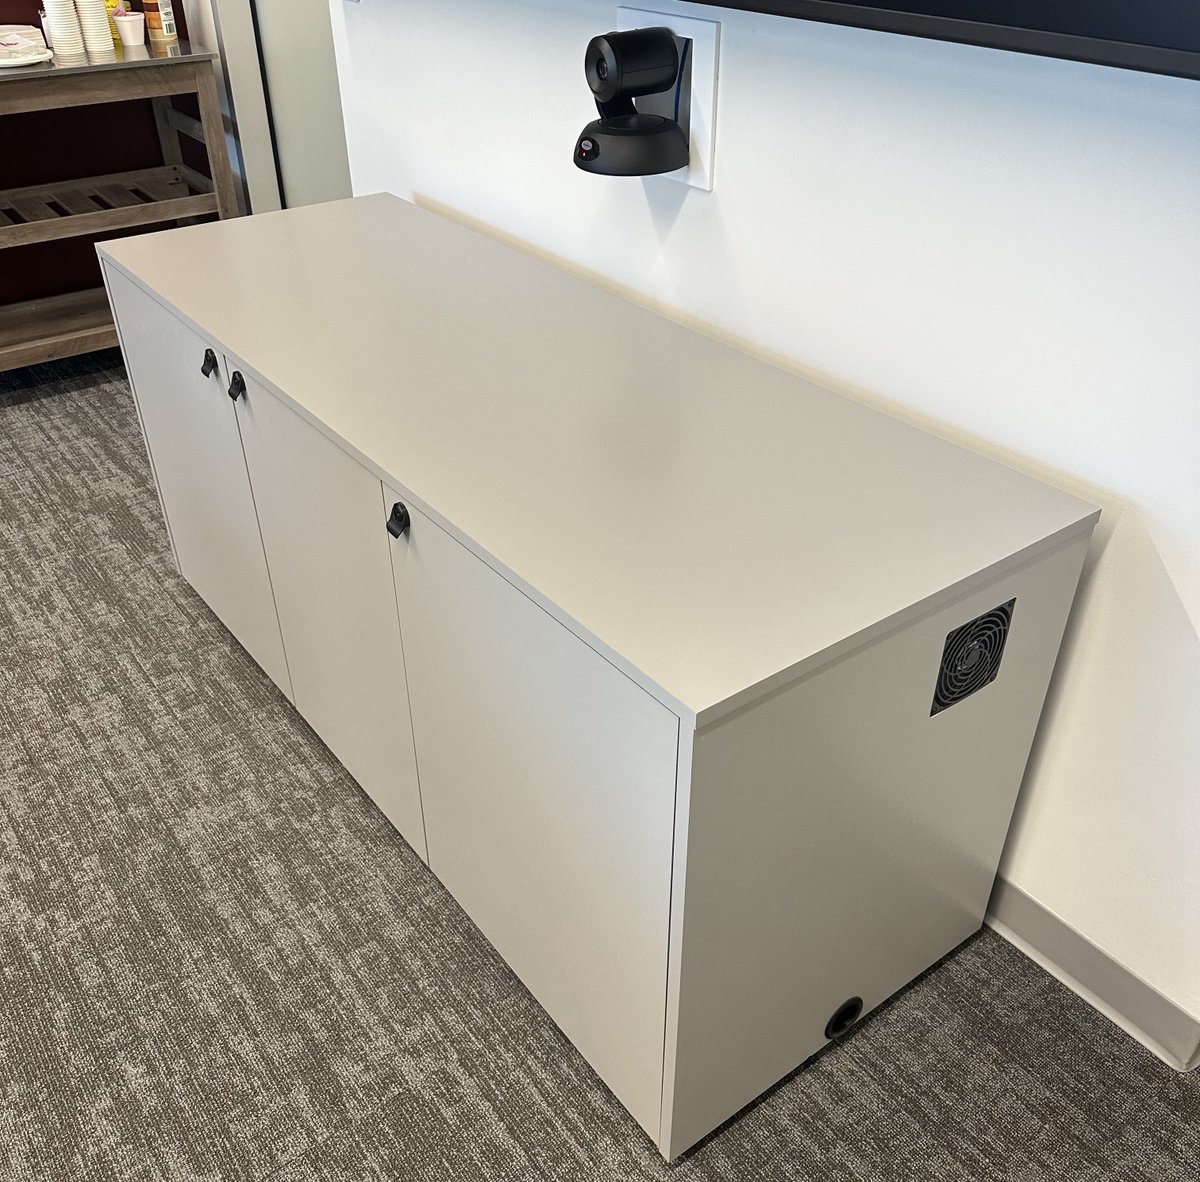 The Boardroom Credenza is designed to elevate any meeting space. Our credenzas combine functionality with style, offering ample storage solutions while enhancing the aesthetic appeal of your boardroom.
#avready #lecterns #avfurniture #avtweeps  #credenza #avrack